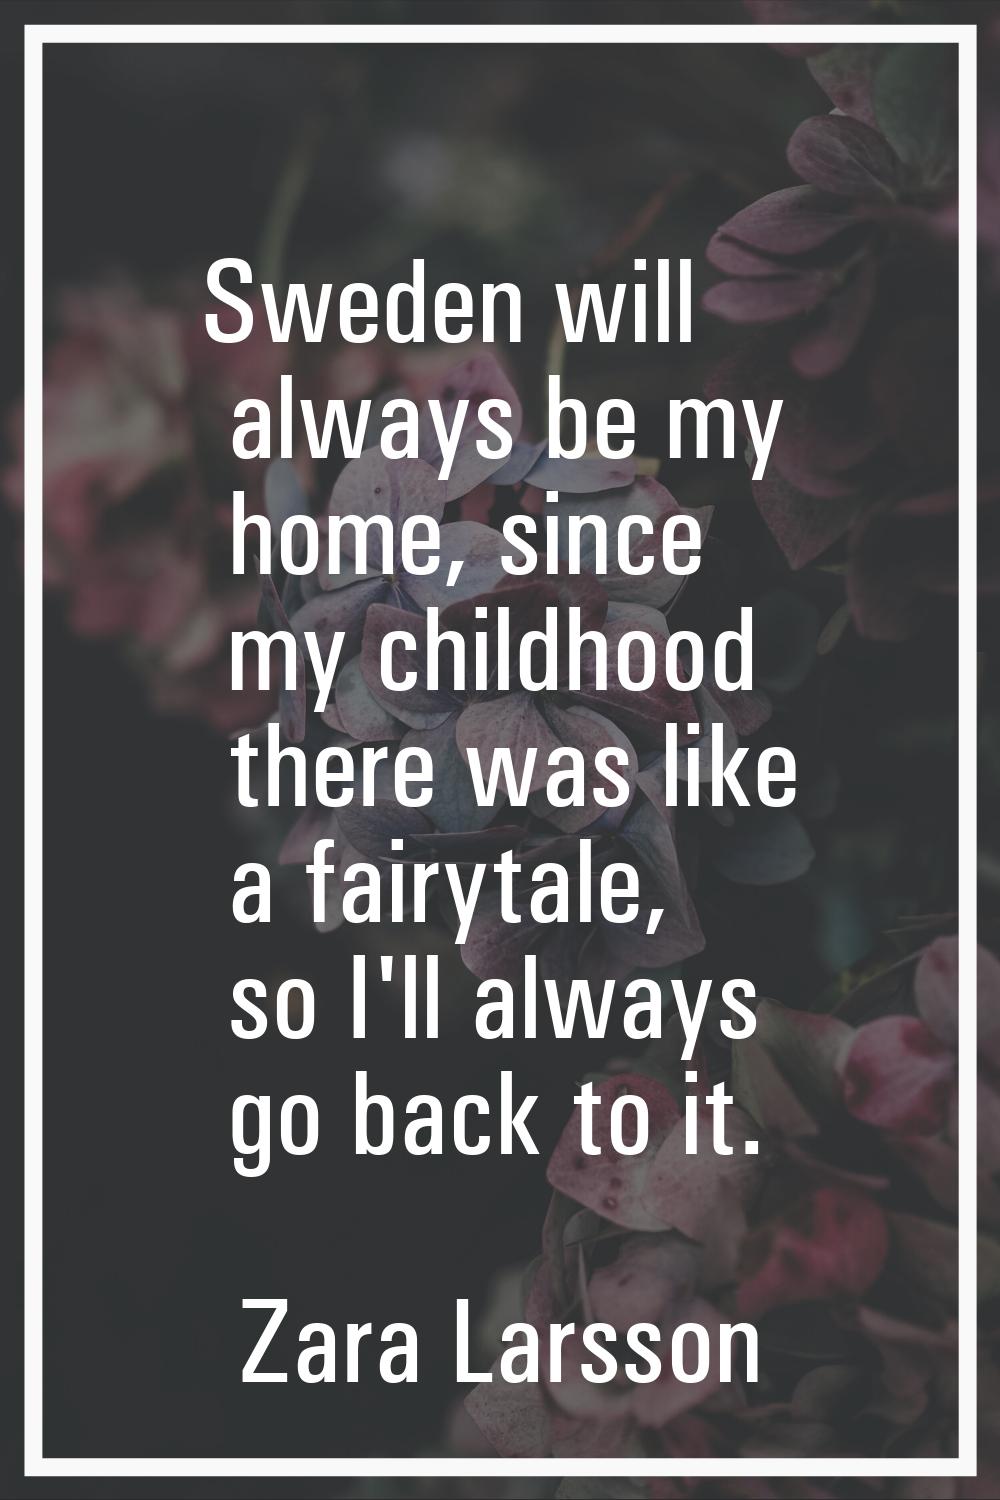 Sweden will always be my home, since my childhood there was like a fairytale, so I'll always go bac